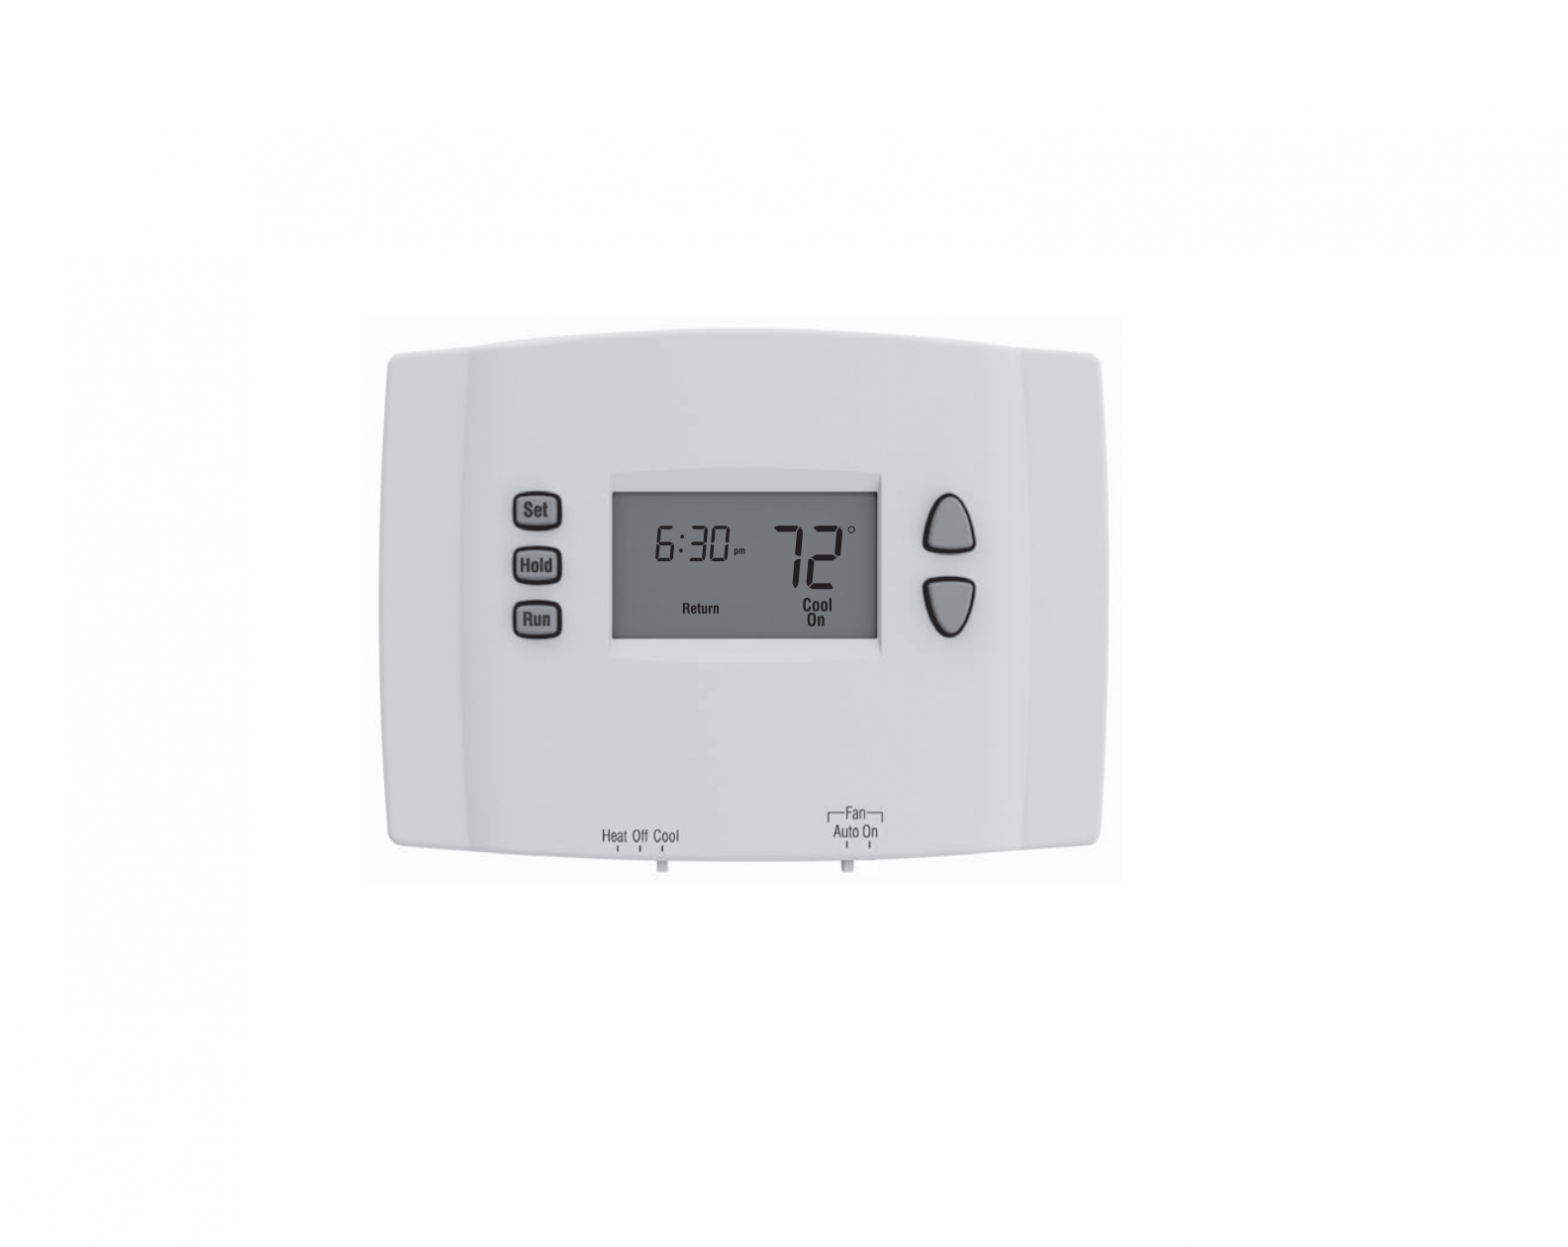 Honeywell RTH2300/RTH221 Programmable Thermostat Installation Guide